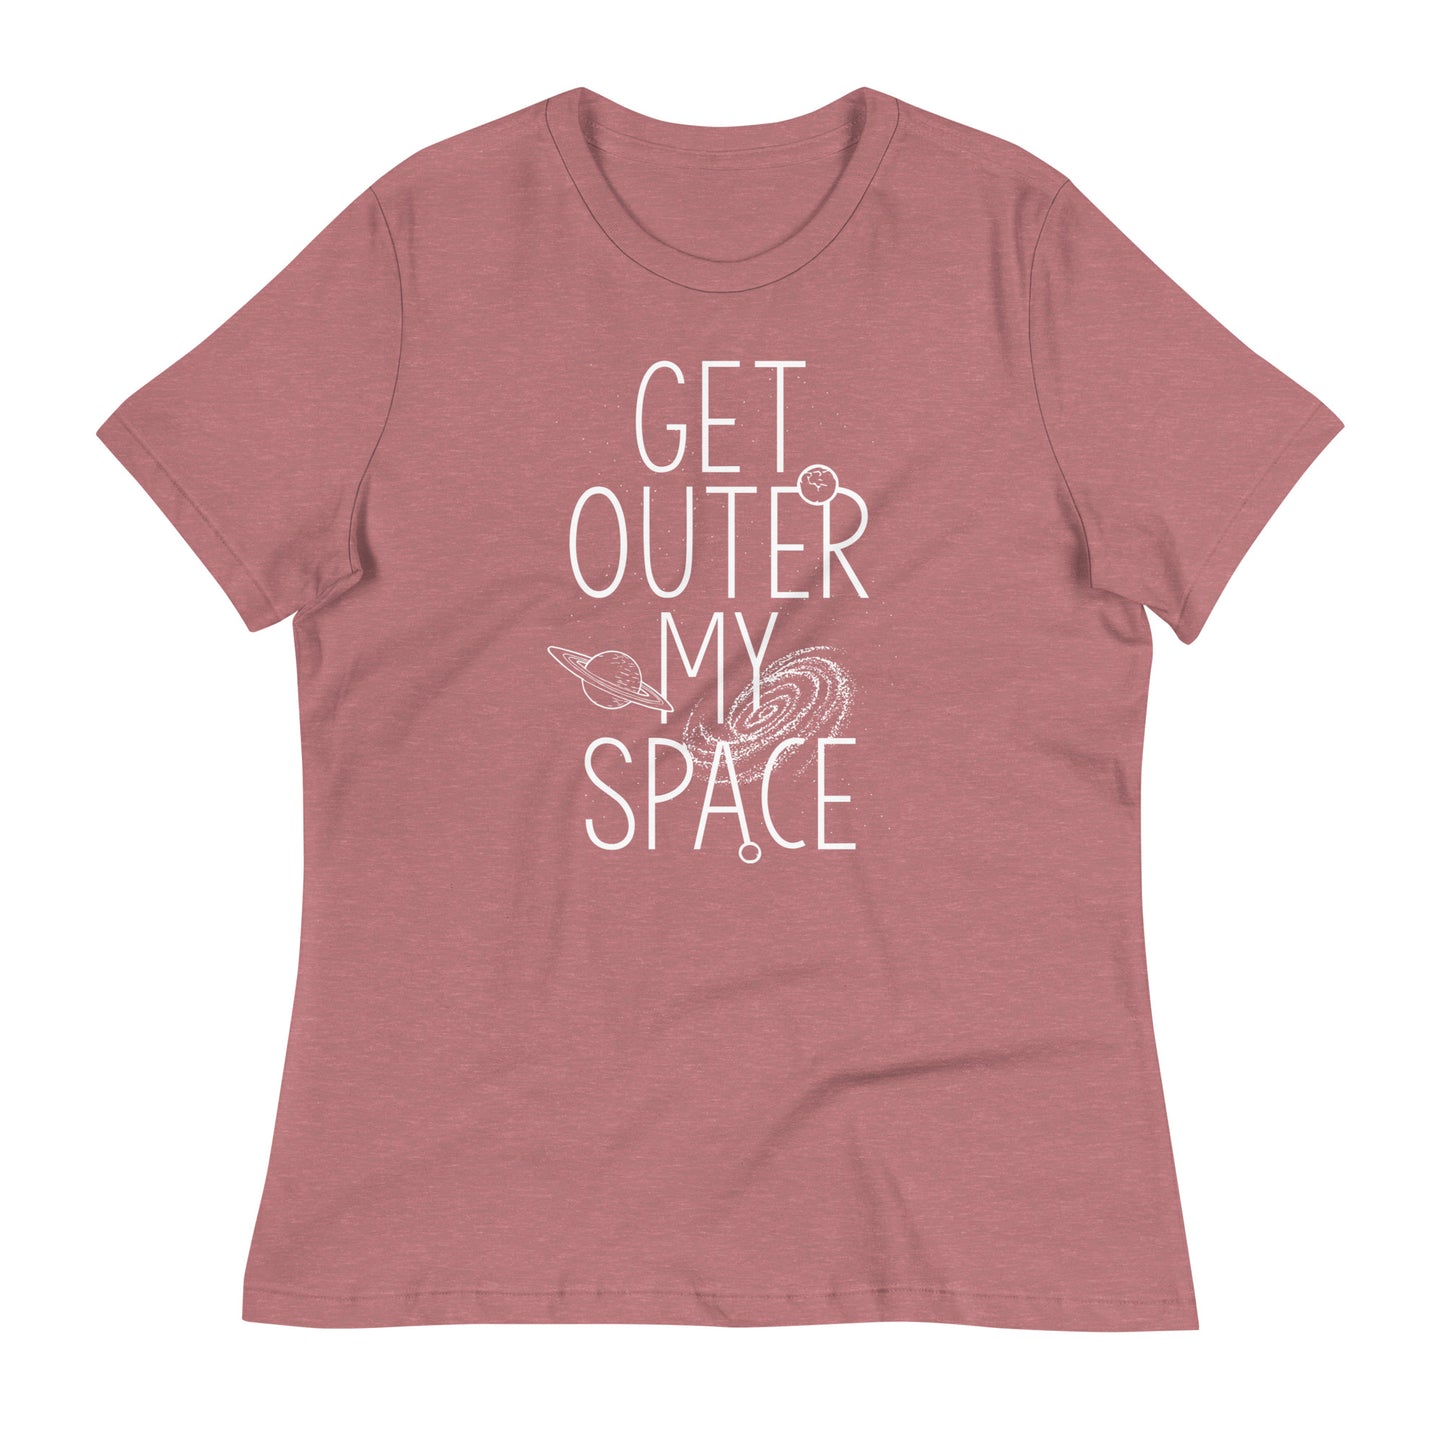 Get Outer My Space Women's Signature Tee